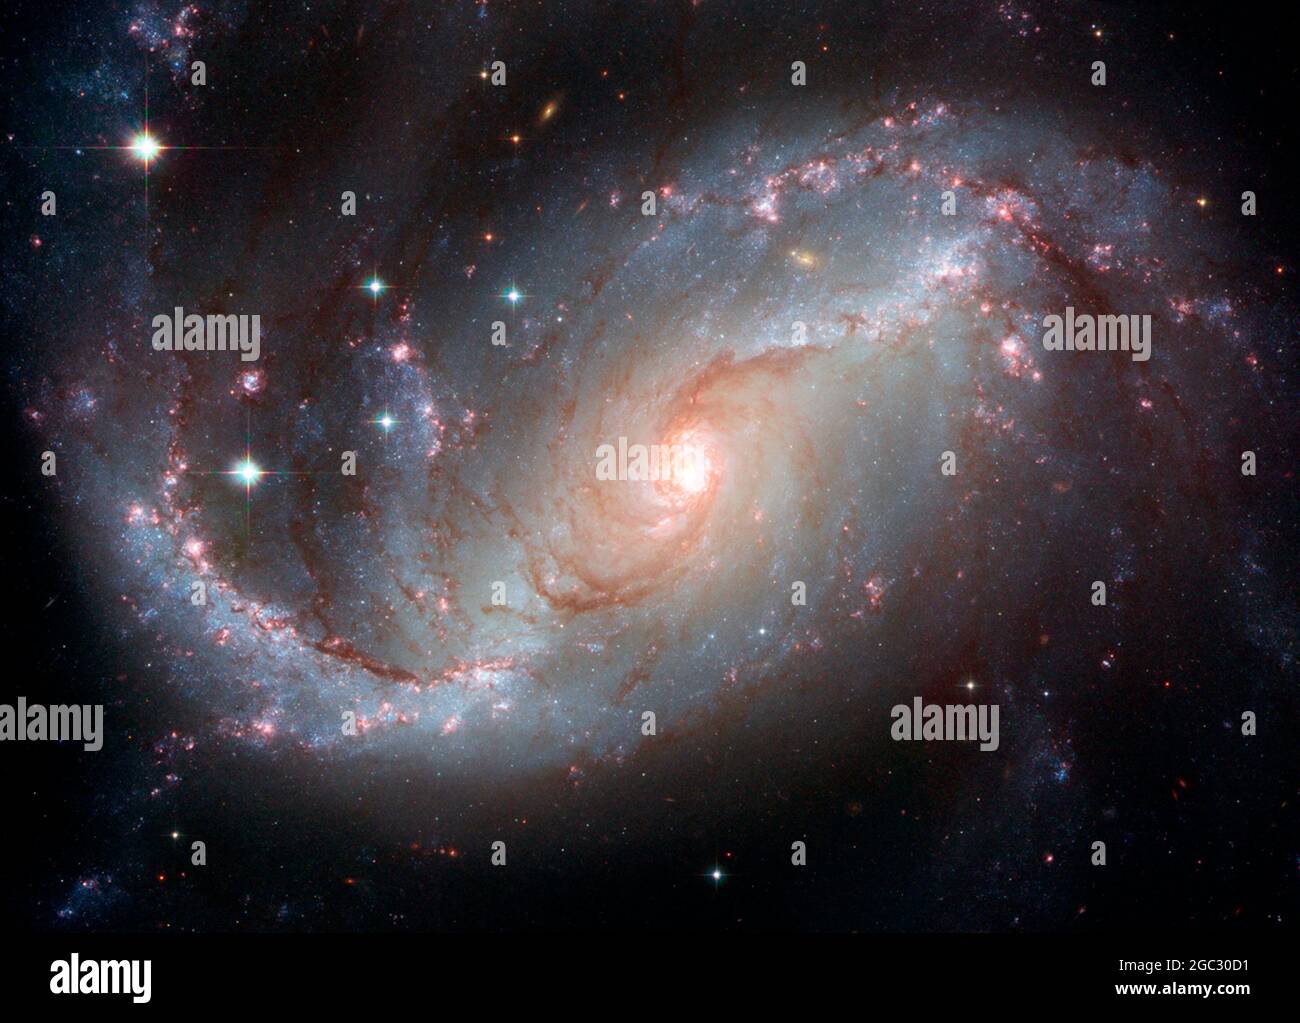 OUTER SPACE - NGC 1672 - also known as the Barred Spiral Galaxy as seen by the Hubble Space Telescope - Photo: Geopix/NASA/ESA Stock Photo